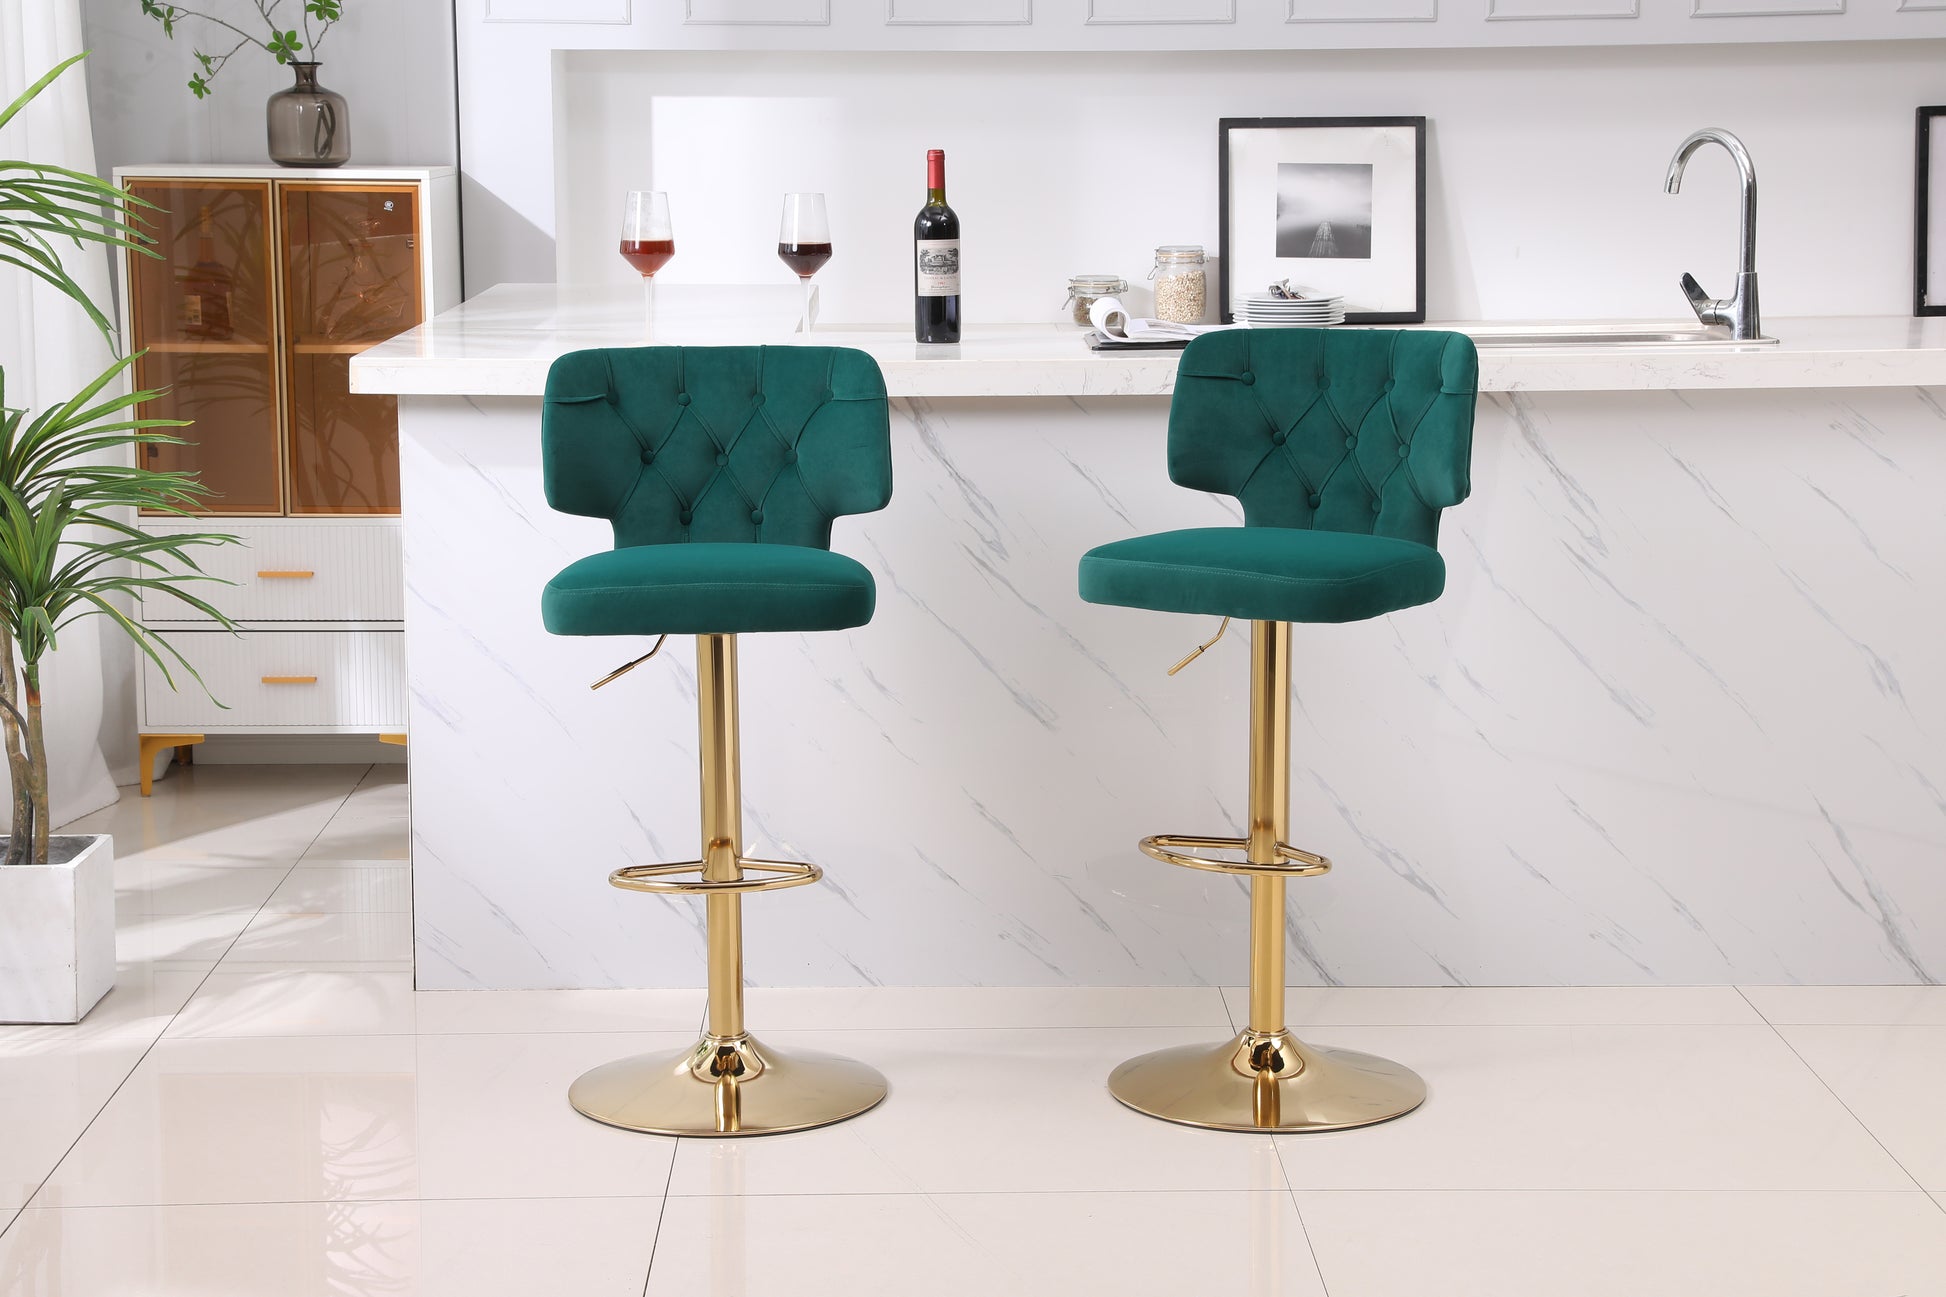 Modern Barstools Bar Height, Swivel Velvet Bar Stool Counter Height Bar Chairs Adjustable Tufted Stool with Back& Footrest for Home Bar Kitchen Island Chair (Emerald, Set of 2) - Enova Luxe Home Store